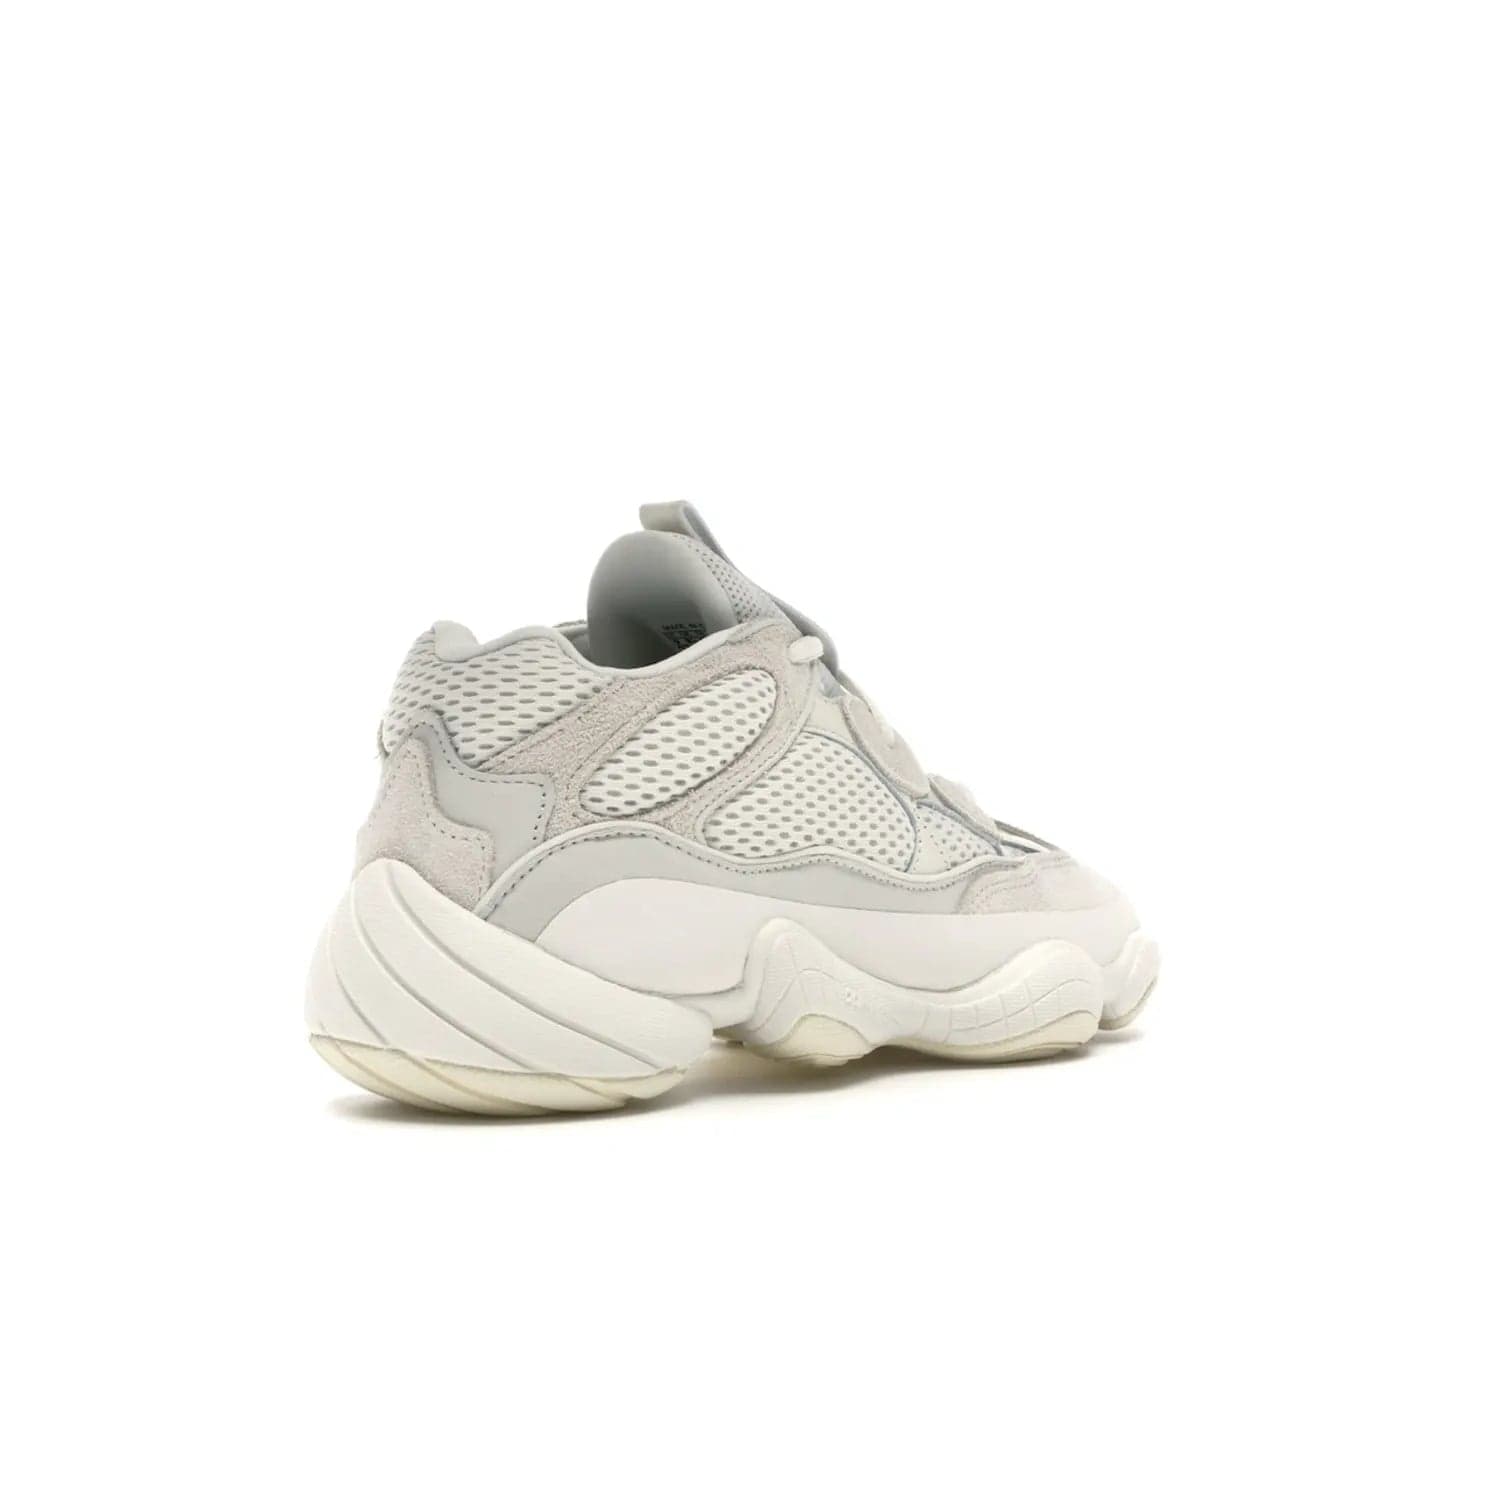 adidas Yeezy 500 Bone White - Image 32 - Only at www.BallersClubKickz.com - Classic look perfect for any sneaker collection. The adidas Yeezy 500 "Bone White" blends a white mesh upper with suede overlays & a chunky midsole inspired by the Adidas KB3. Complimented by a tonal-cream outsole, this timeless style is a must-have.